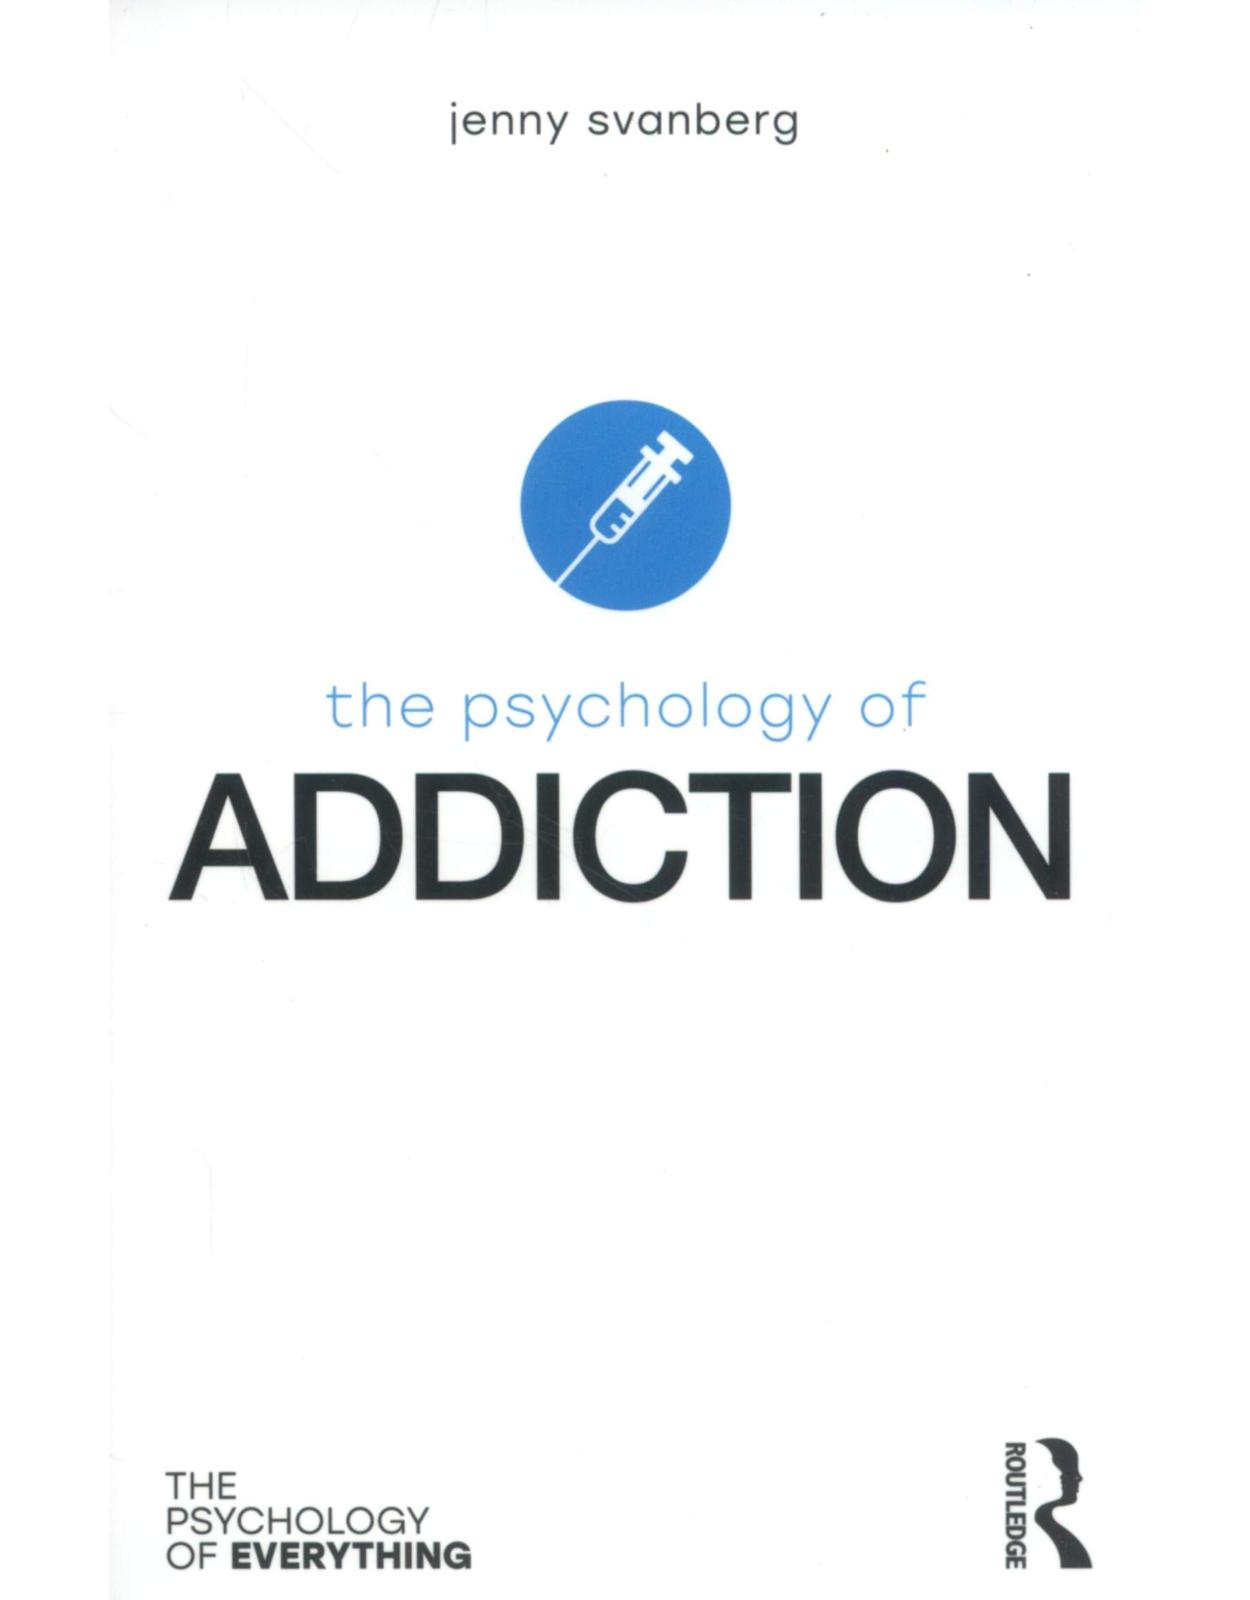 The Psychology of Addiction (The Psychology of Everything)